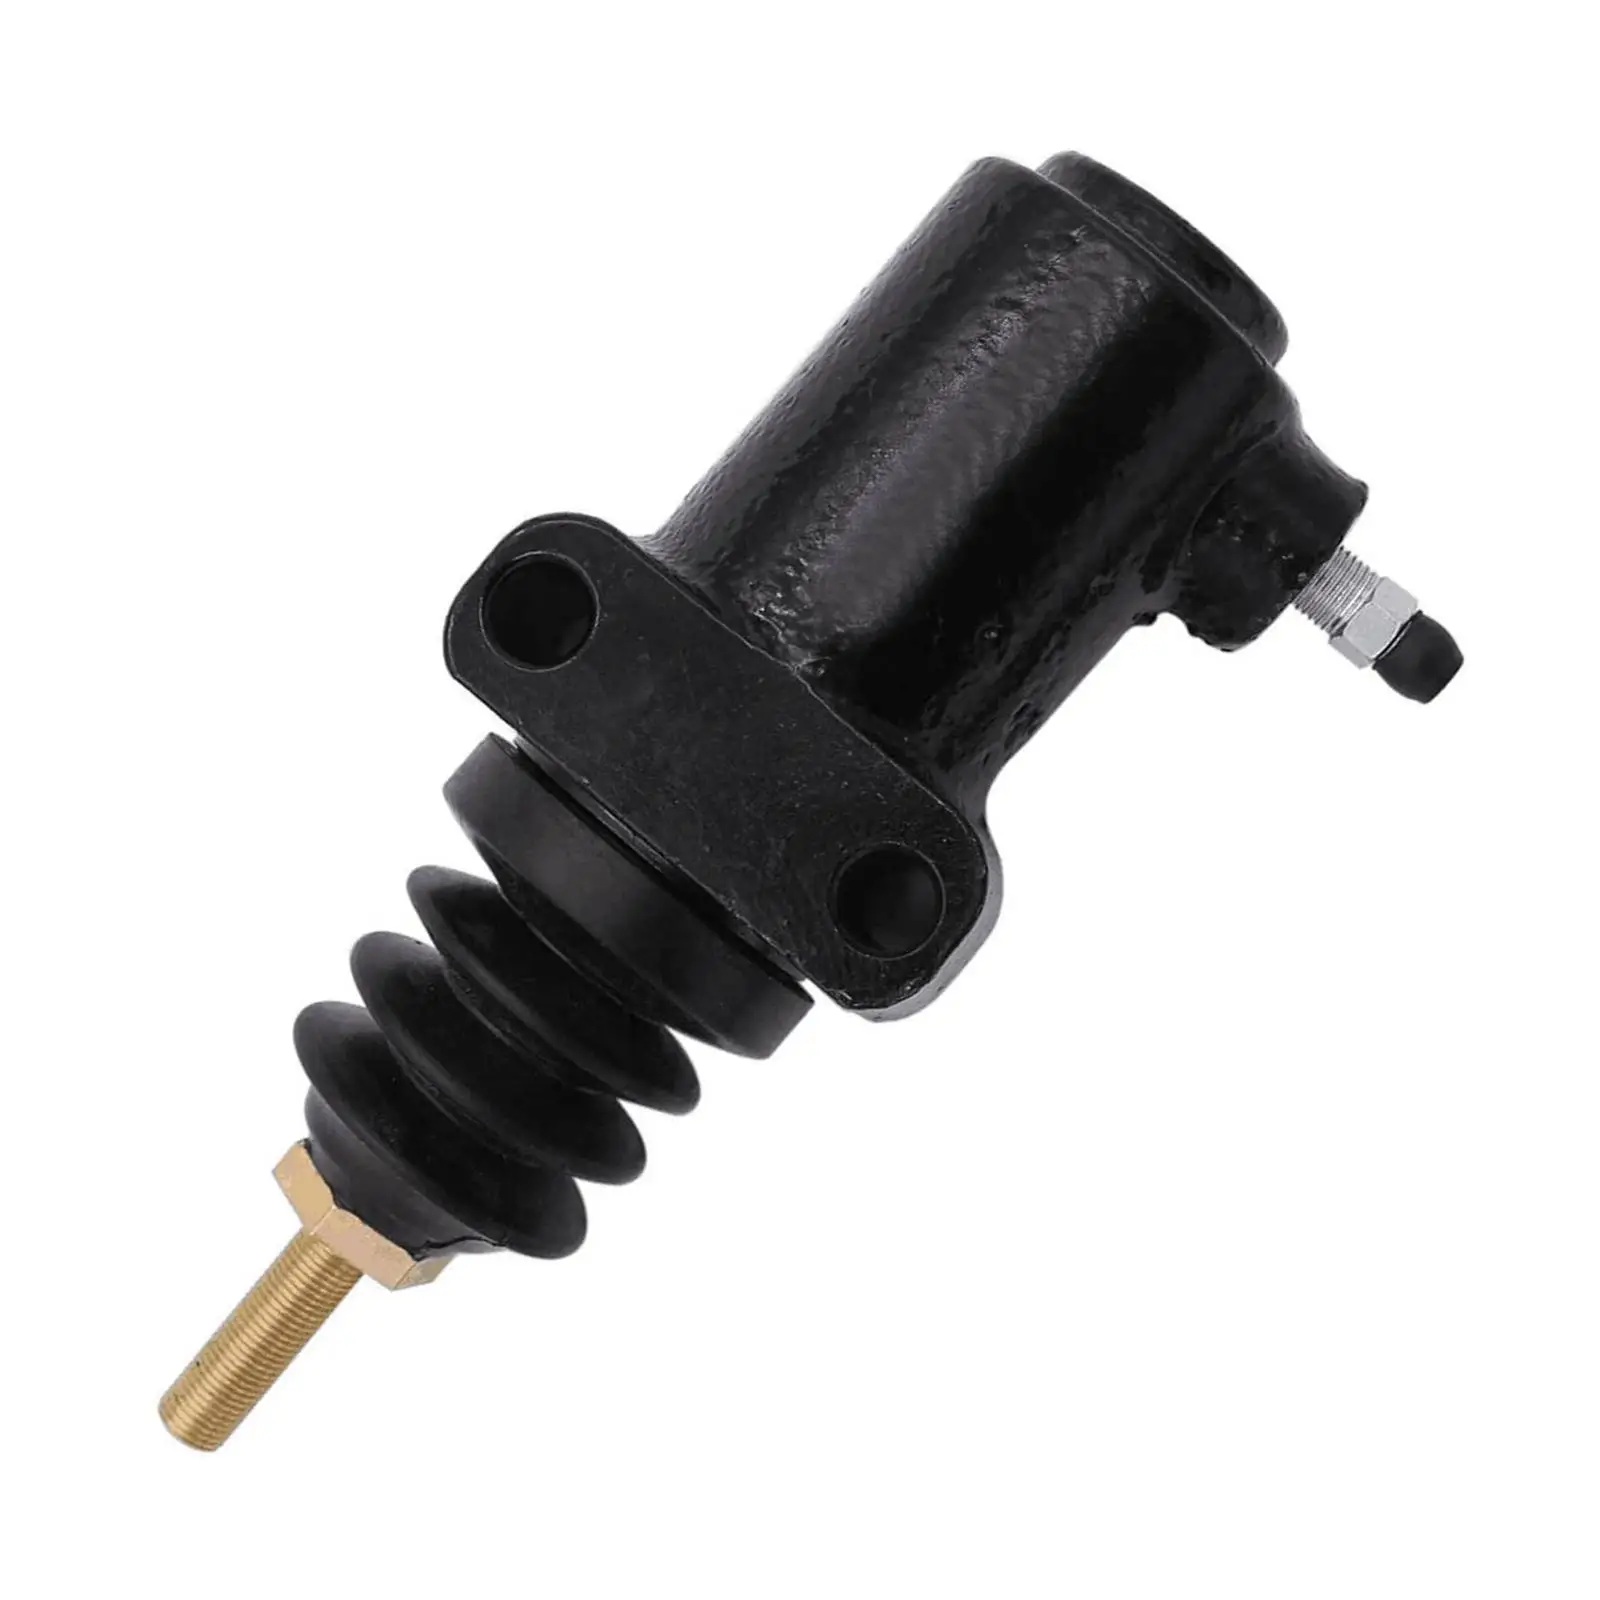 Clutch Slave Cylinder 8089526 8075008 for Vnl Spare Parts Replaces Easily